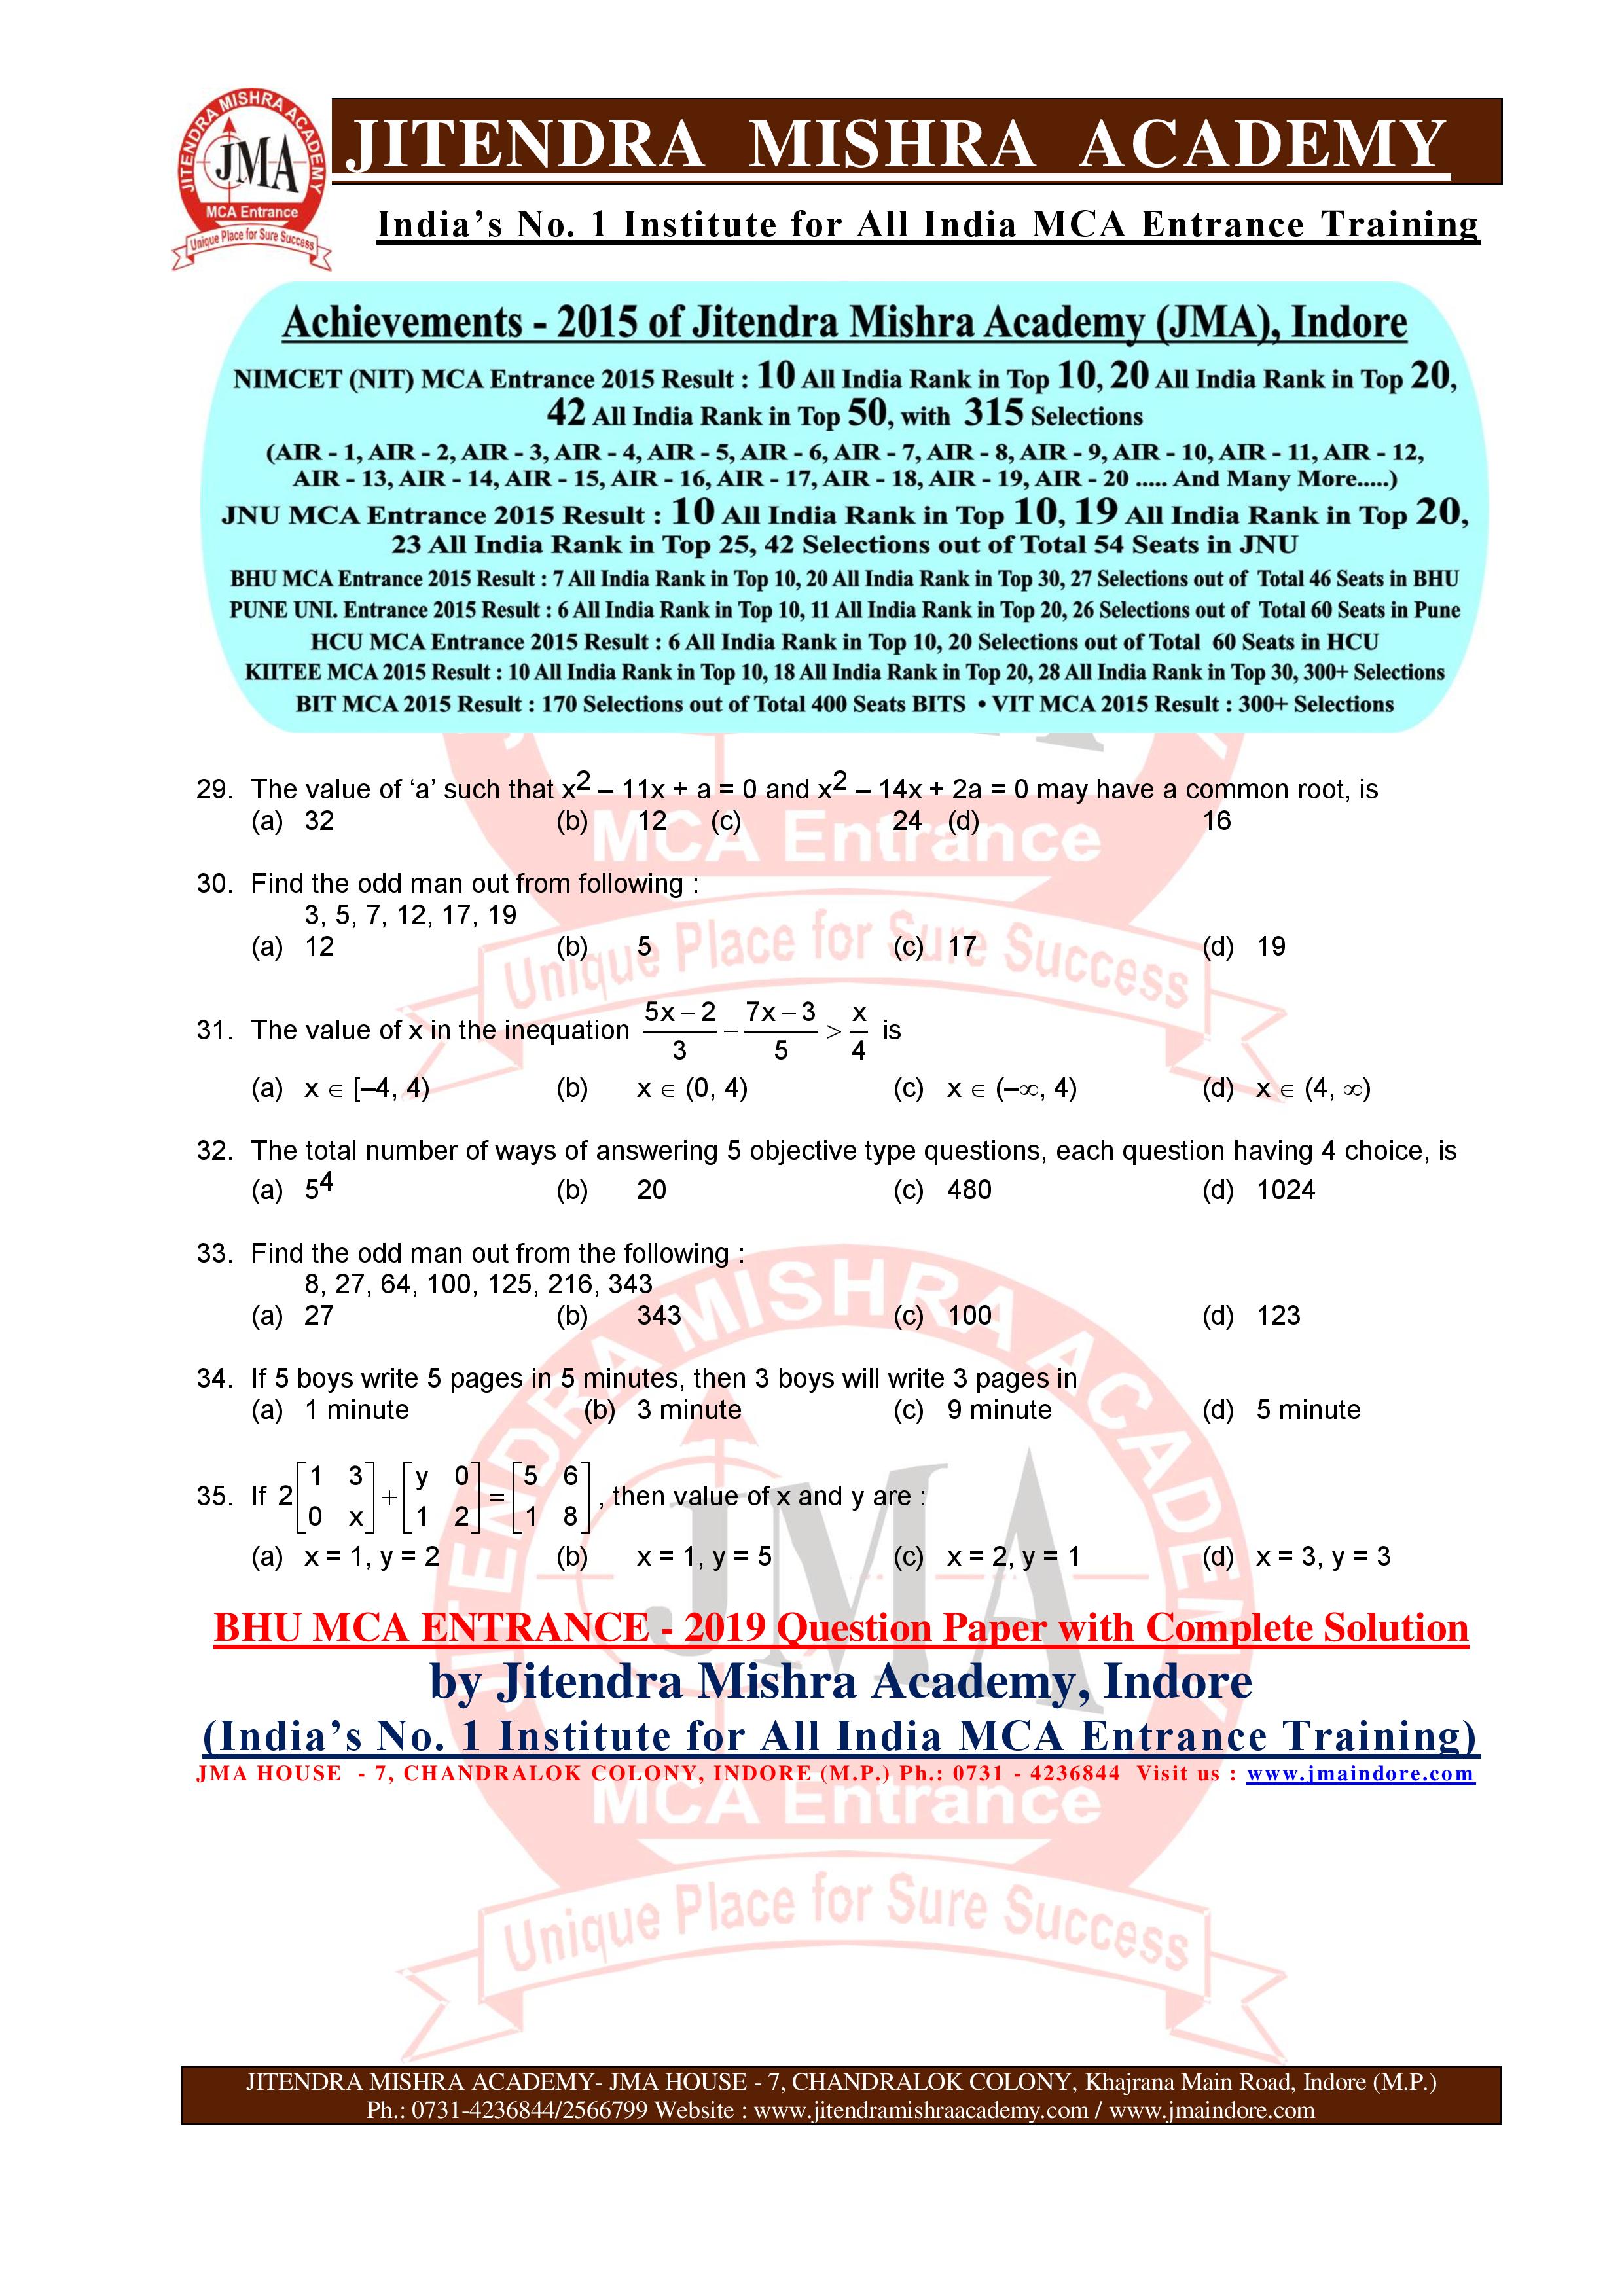 BHU MCA 2019 QUESTION PAPER-page-006